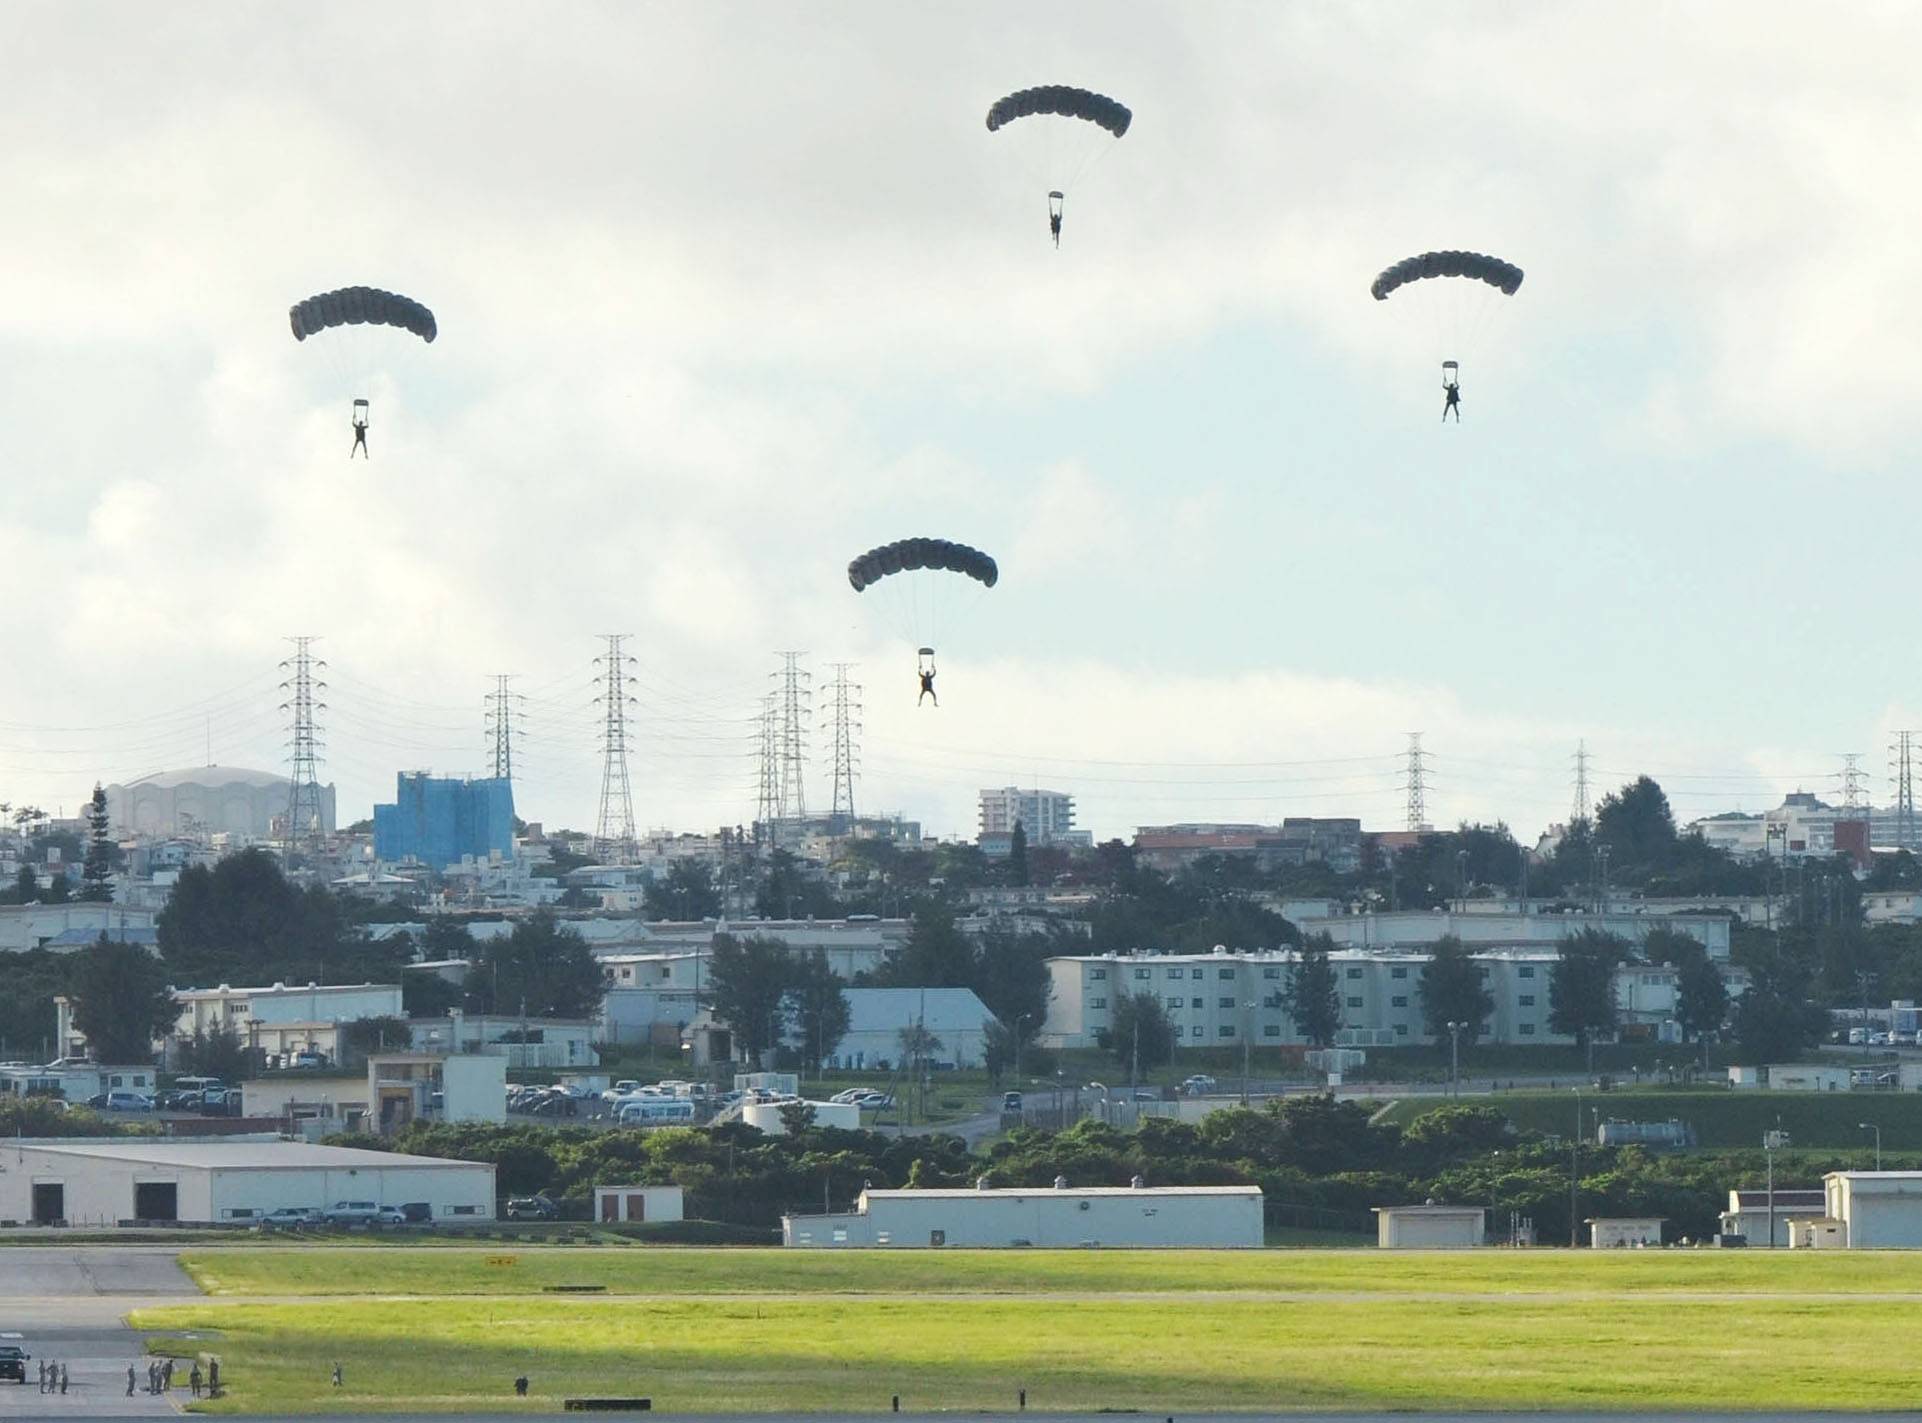 The U.S. military conducts a parachute drill on Sept. 21, 2017, at Kadena Air Base in Okinawa Prefecture, despite demands by both the central and local governments that the drill be canceled.